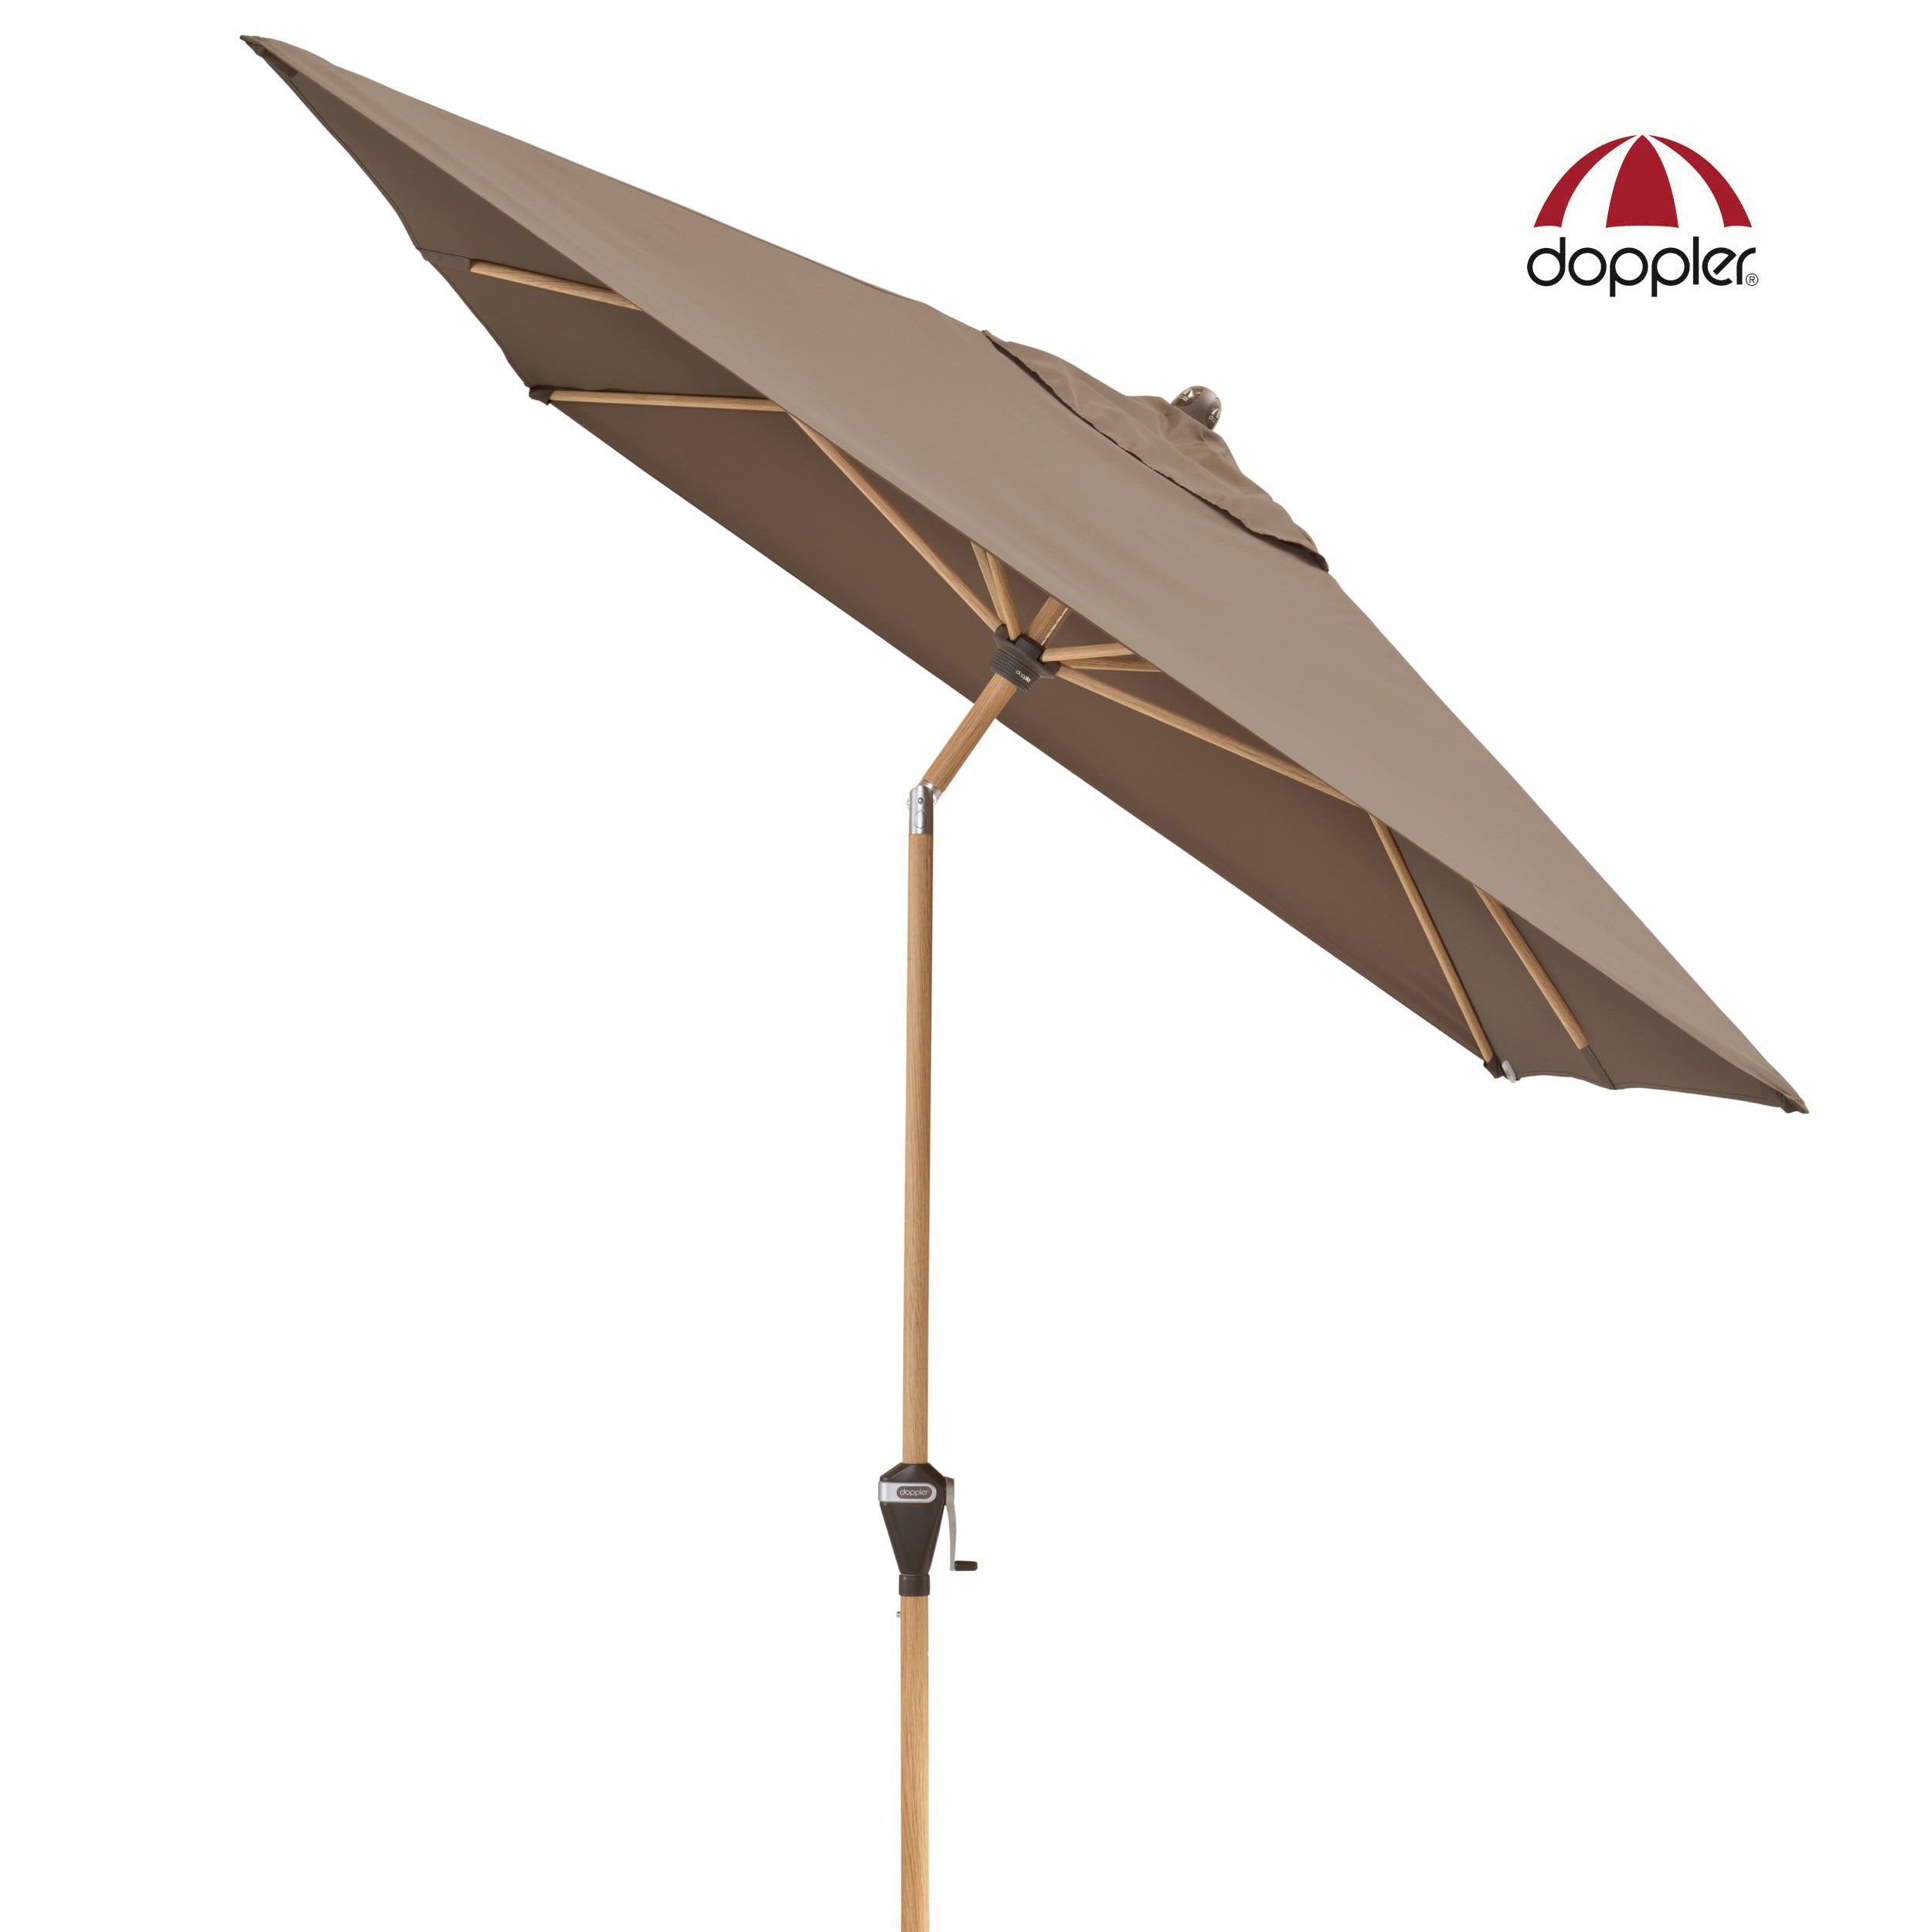 Outdoor Aluminium with Wood Look Centre Pole Umbrella (Parasol) with Auto-Tilt Mast and UV 50+ protective fabric